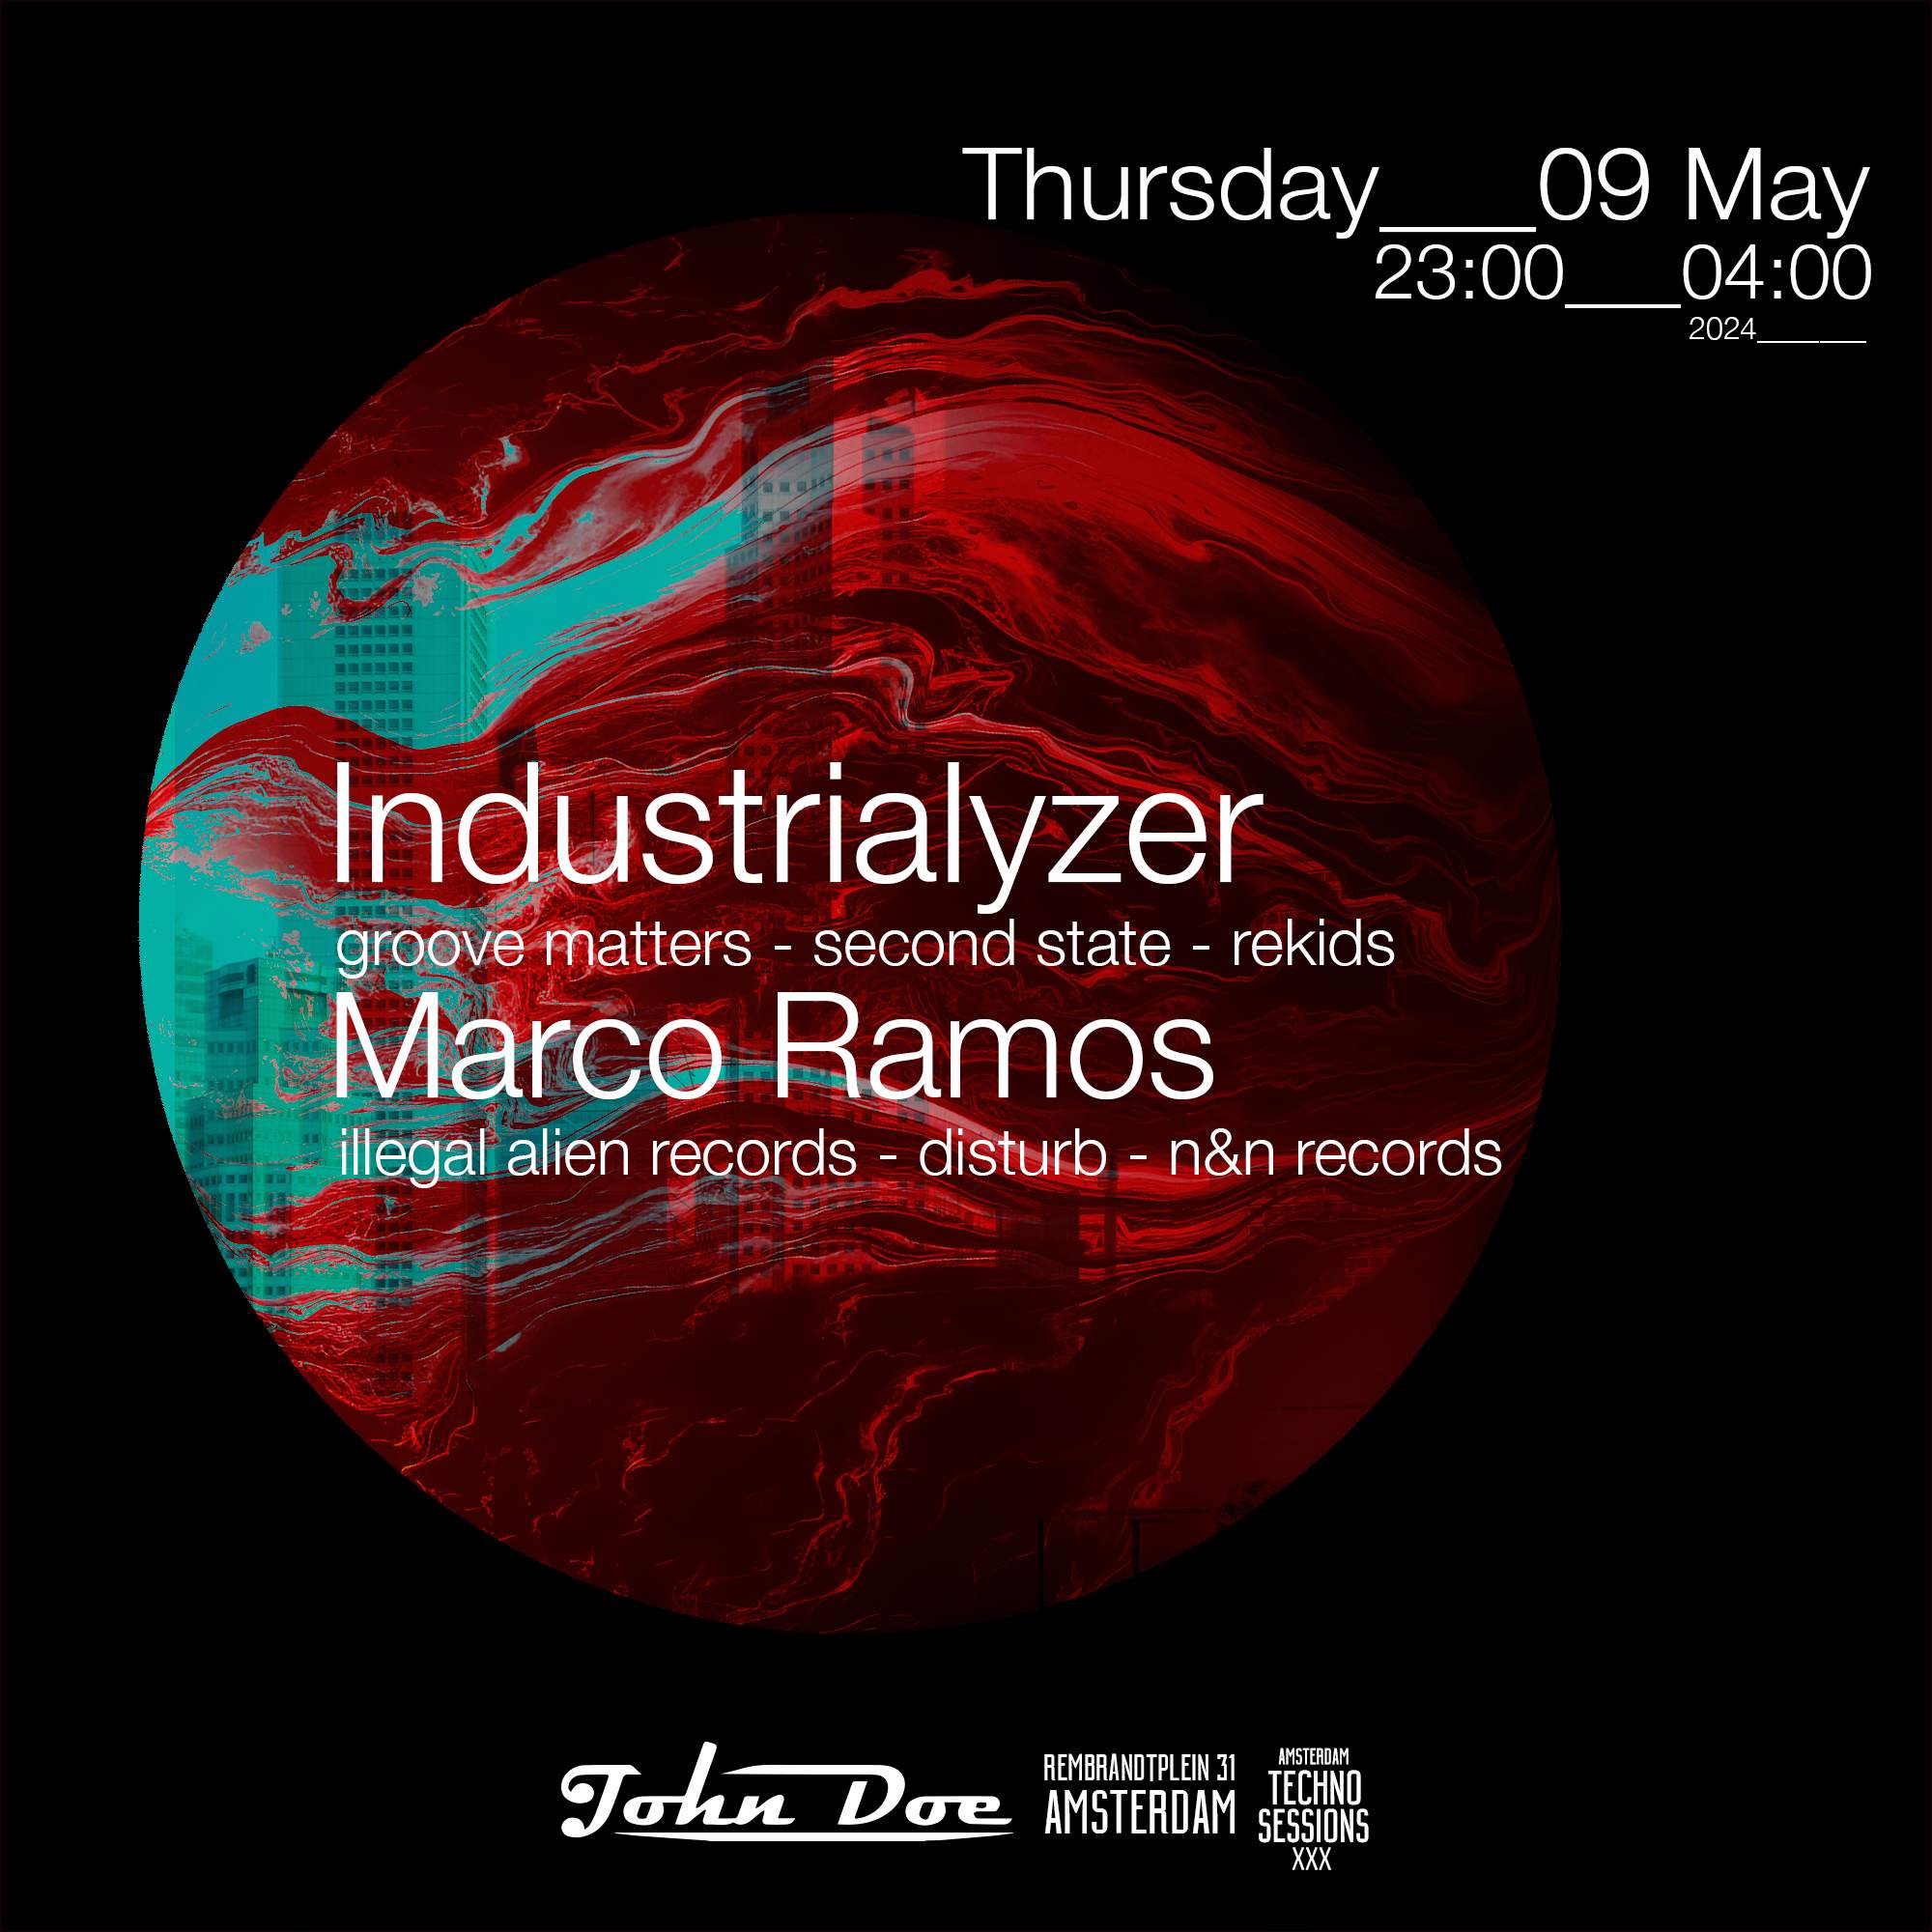 Amsterdam Techno Sessions w/ Industrialyzer (Groove Matters - Second State - Rekids) - フライヤー表